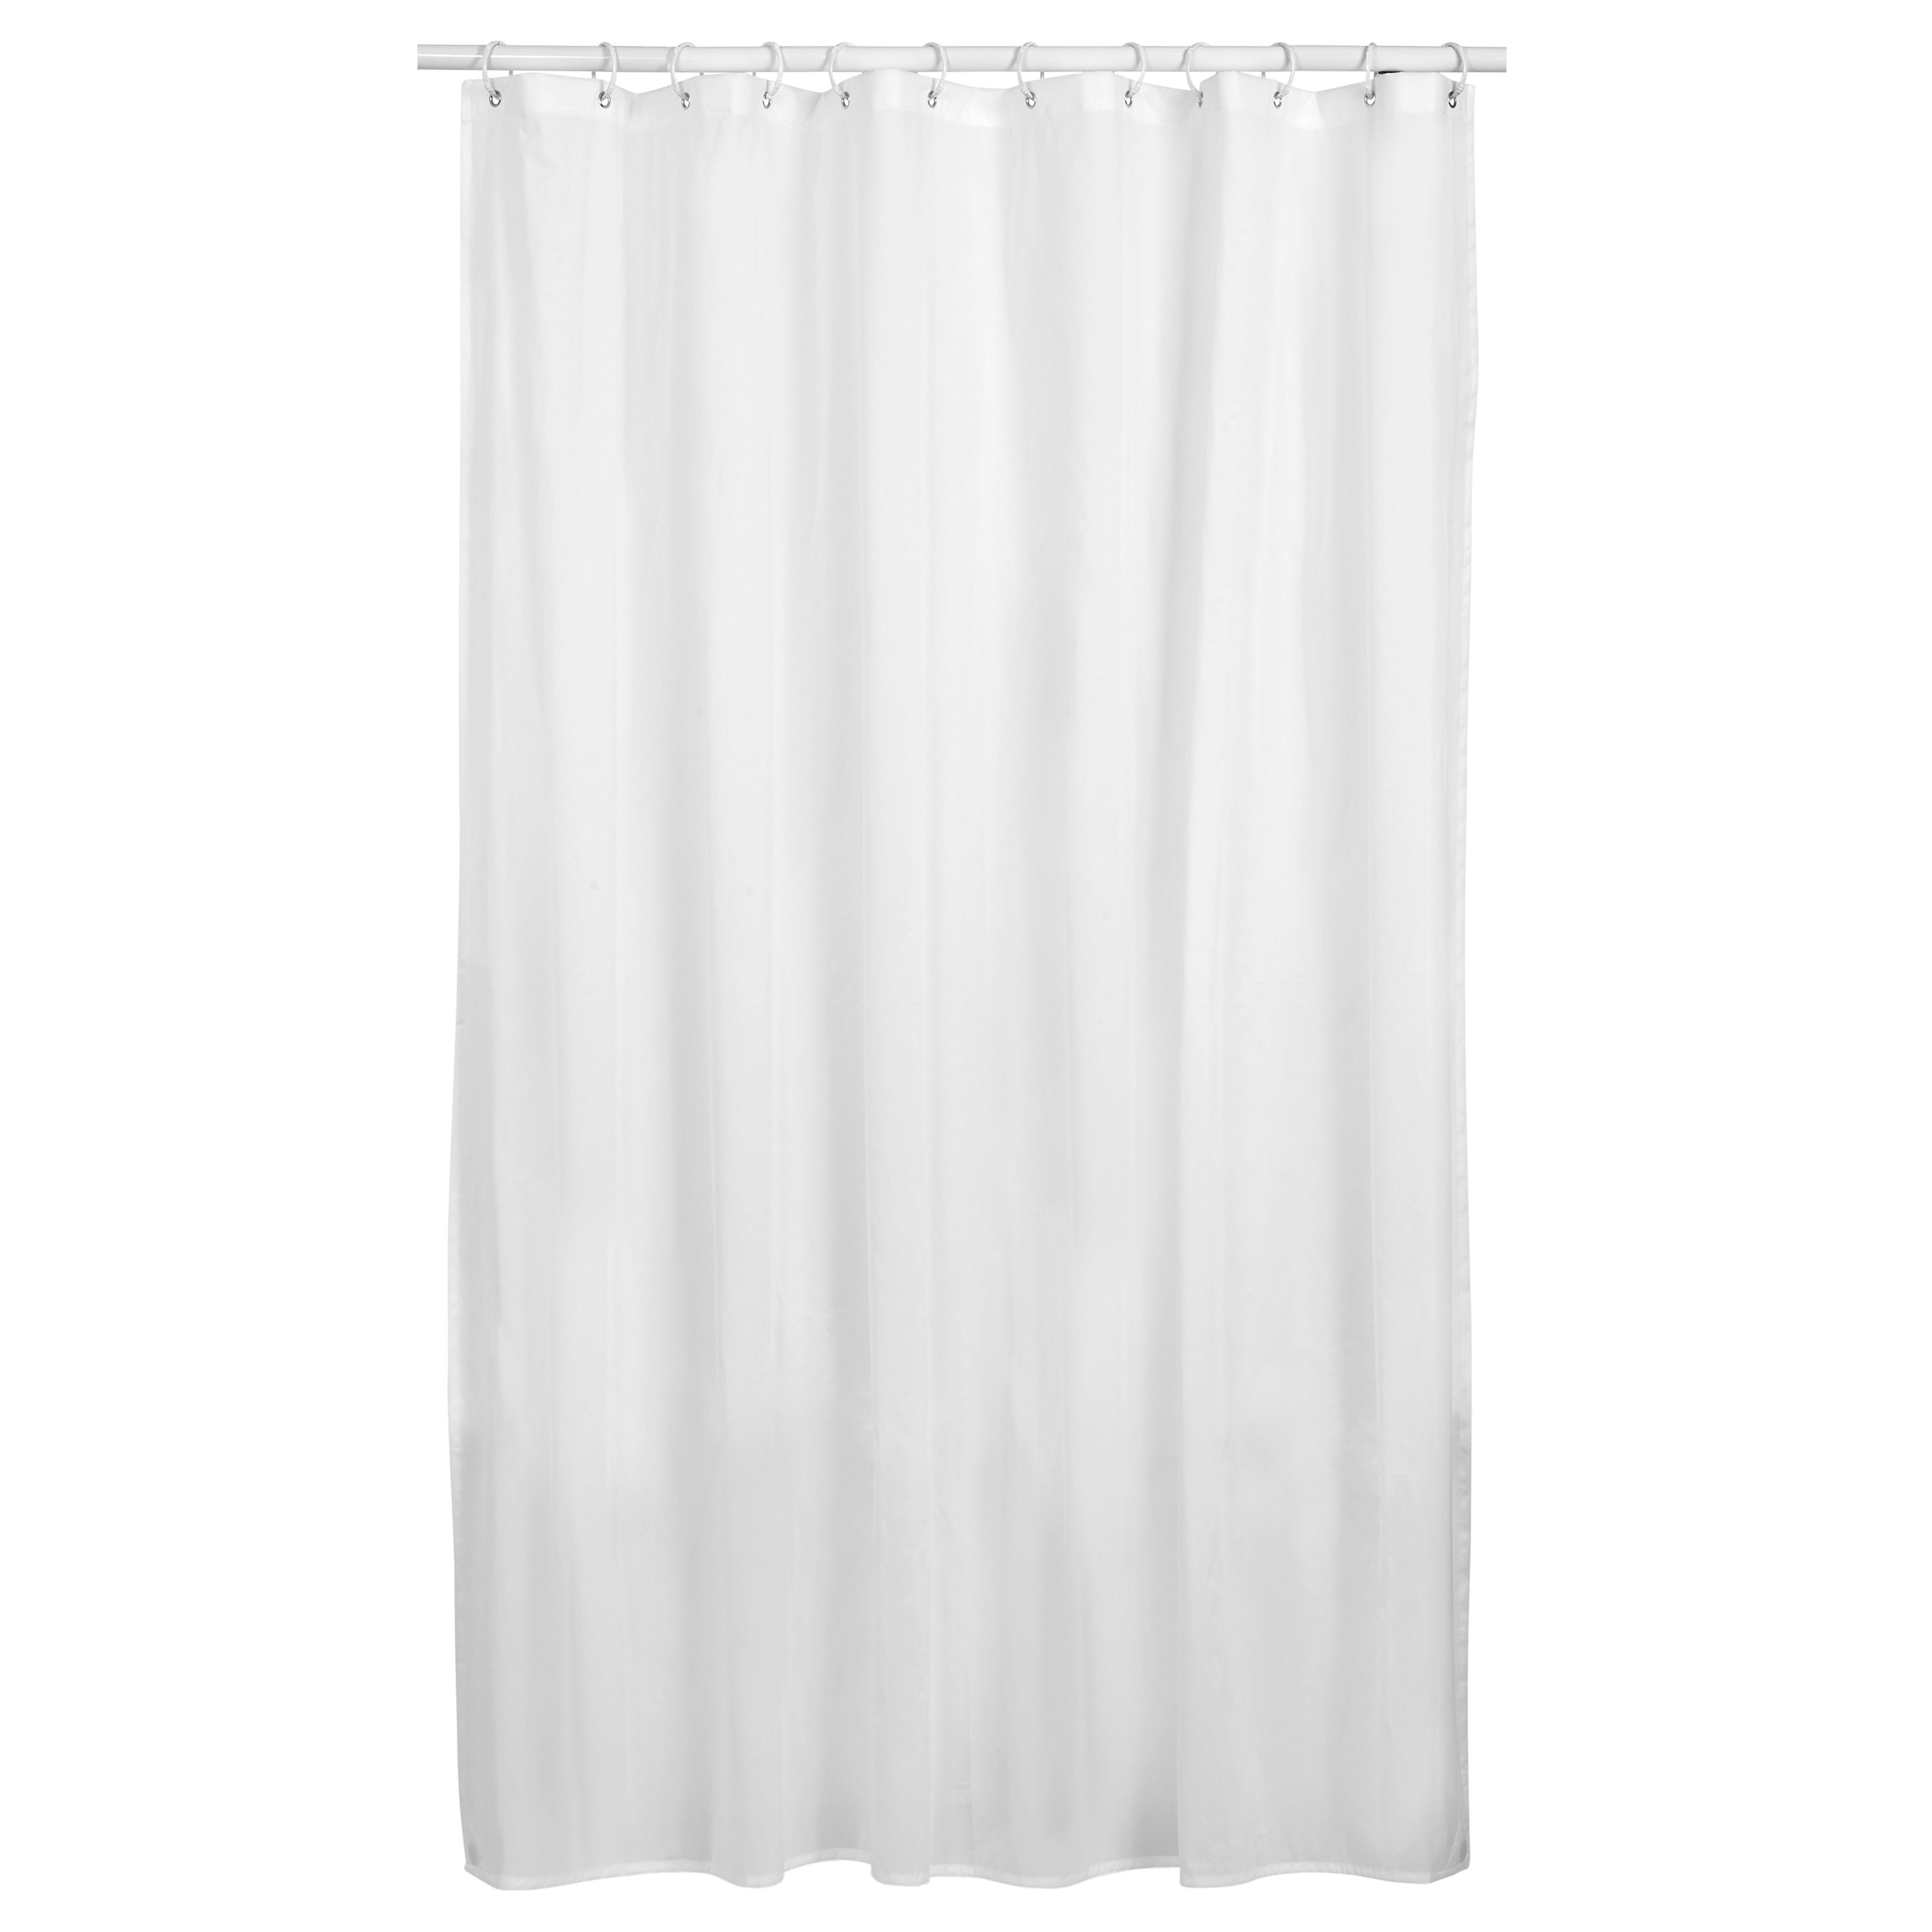 White Pattern Bathroom Waterproof Shower Curtains with Plastic Hook Home Textile 